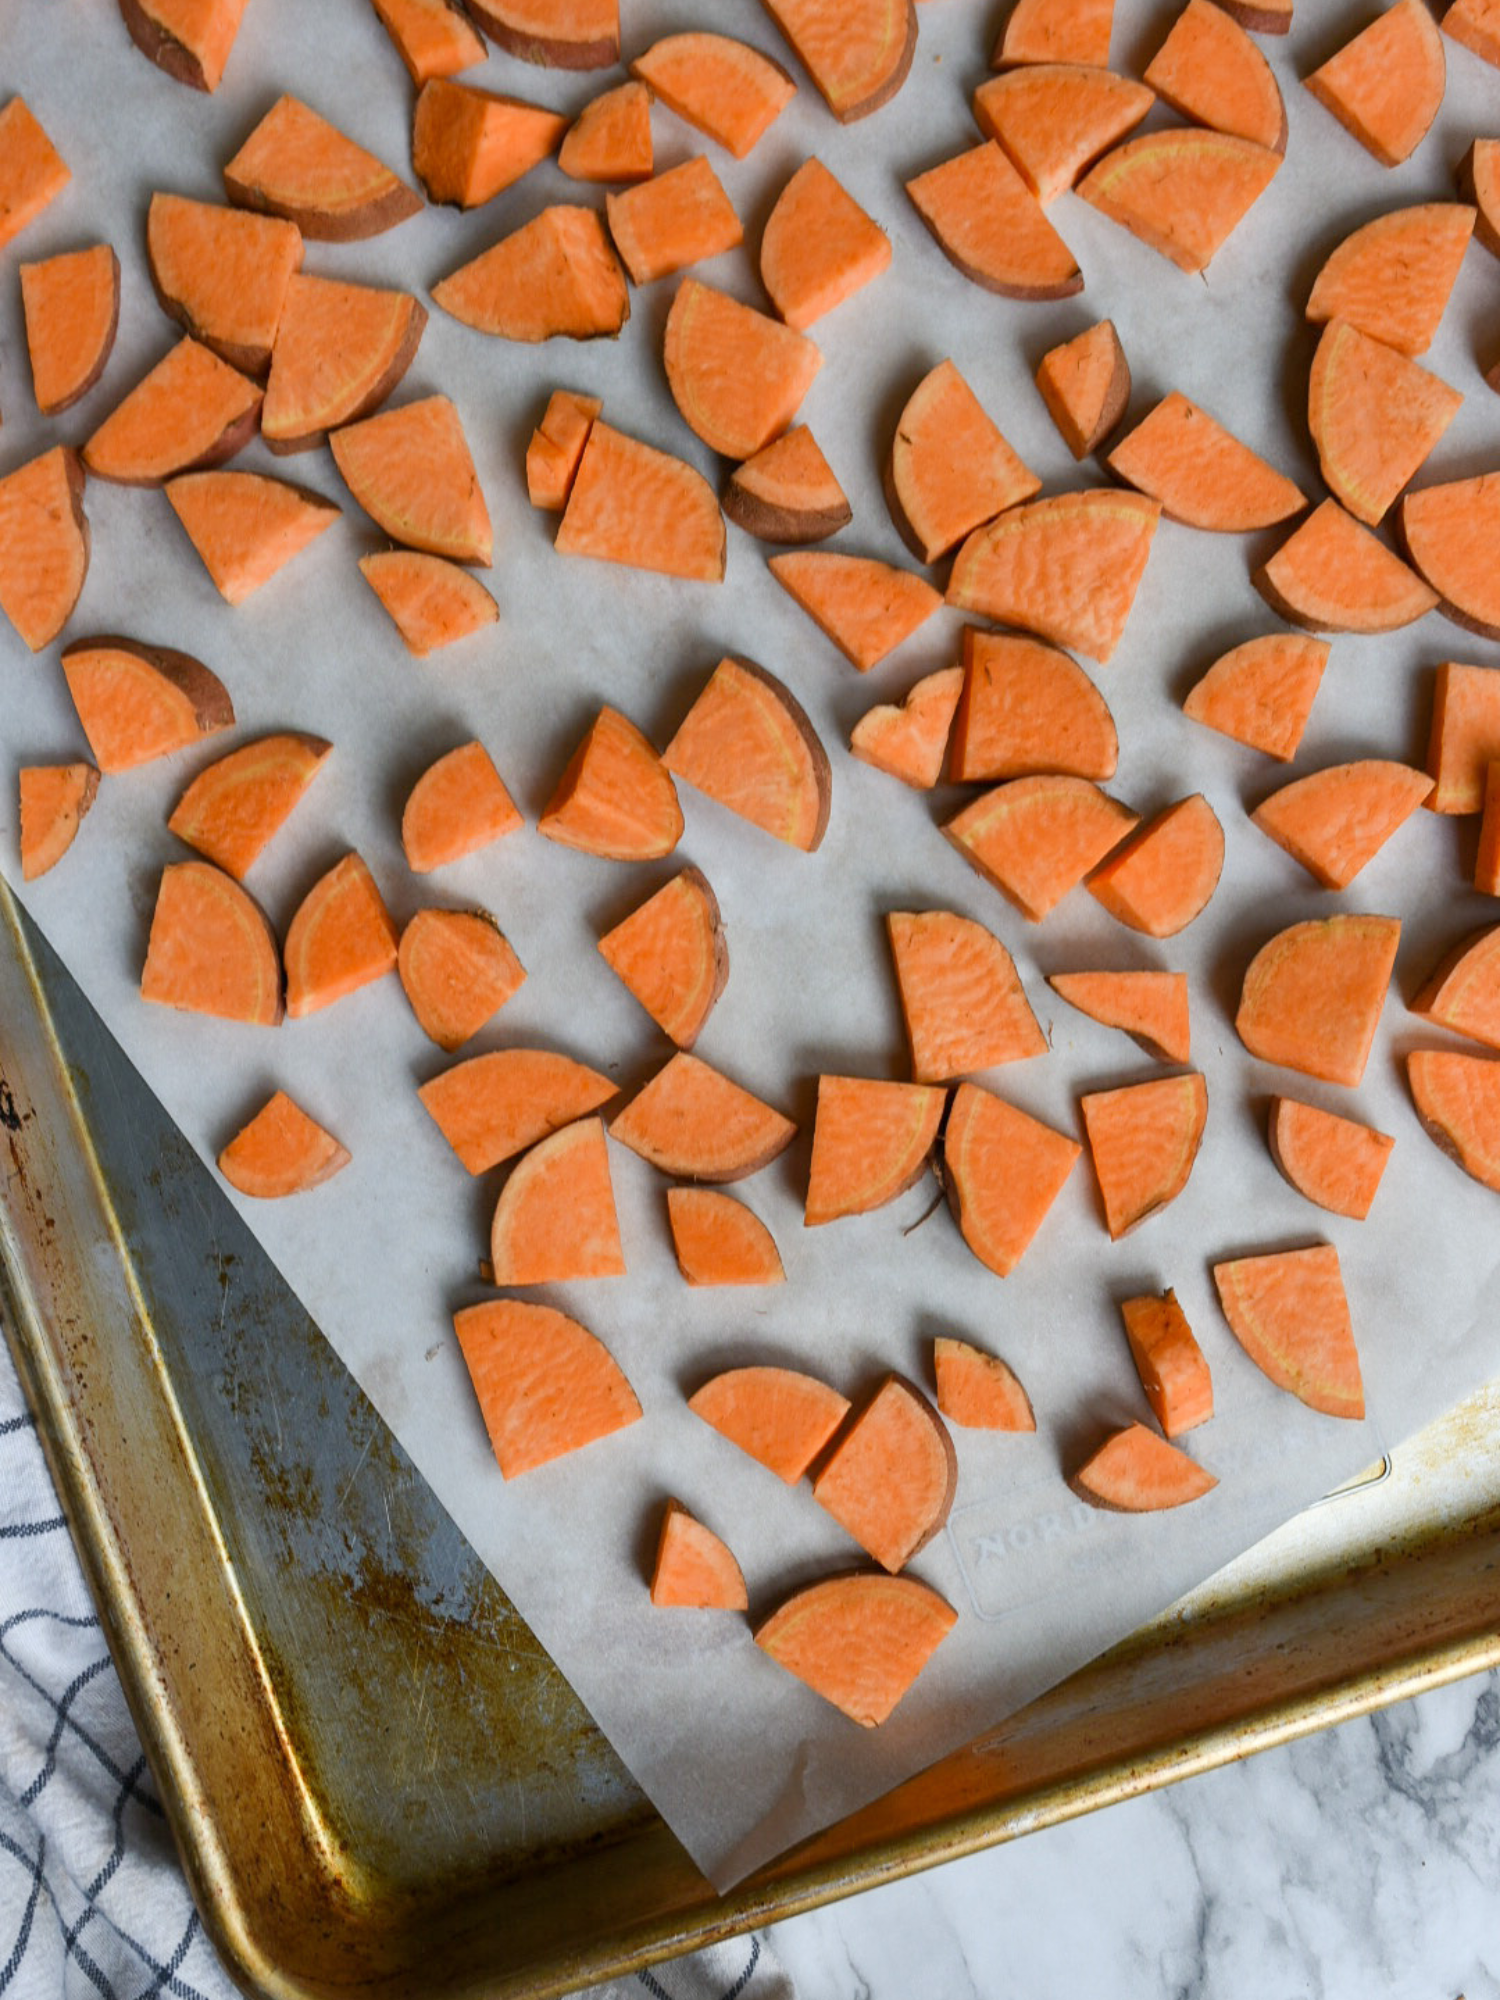 chopped sweet potatoes spread evenly on a parchment lined baking sheet